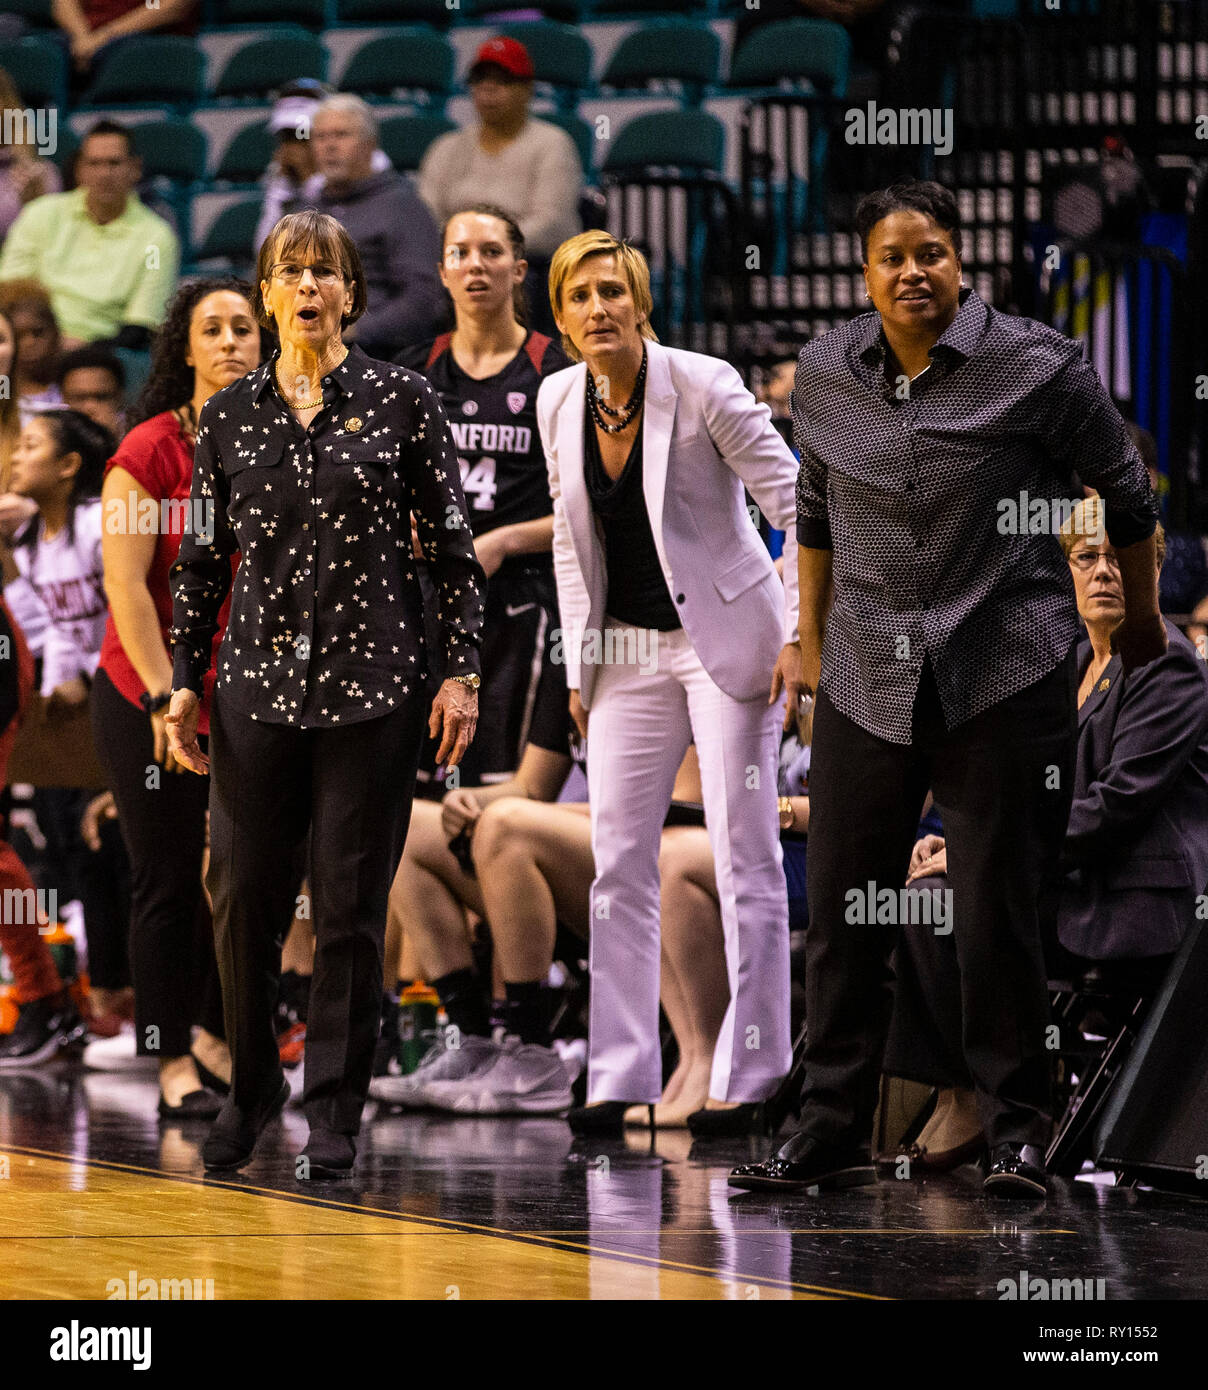 Mar 10 2019 Las Vegas, NV, . Stanford head coach Tara VanDerveer and  her coaching staff during the NCAA Pac 12 Women's Basketball tournament  championship between the Oregon Ducks and the Stanford